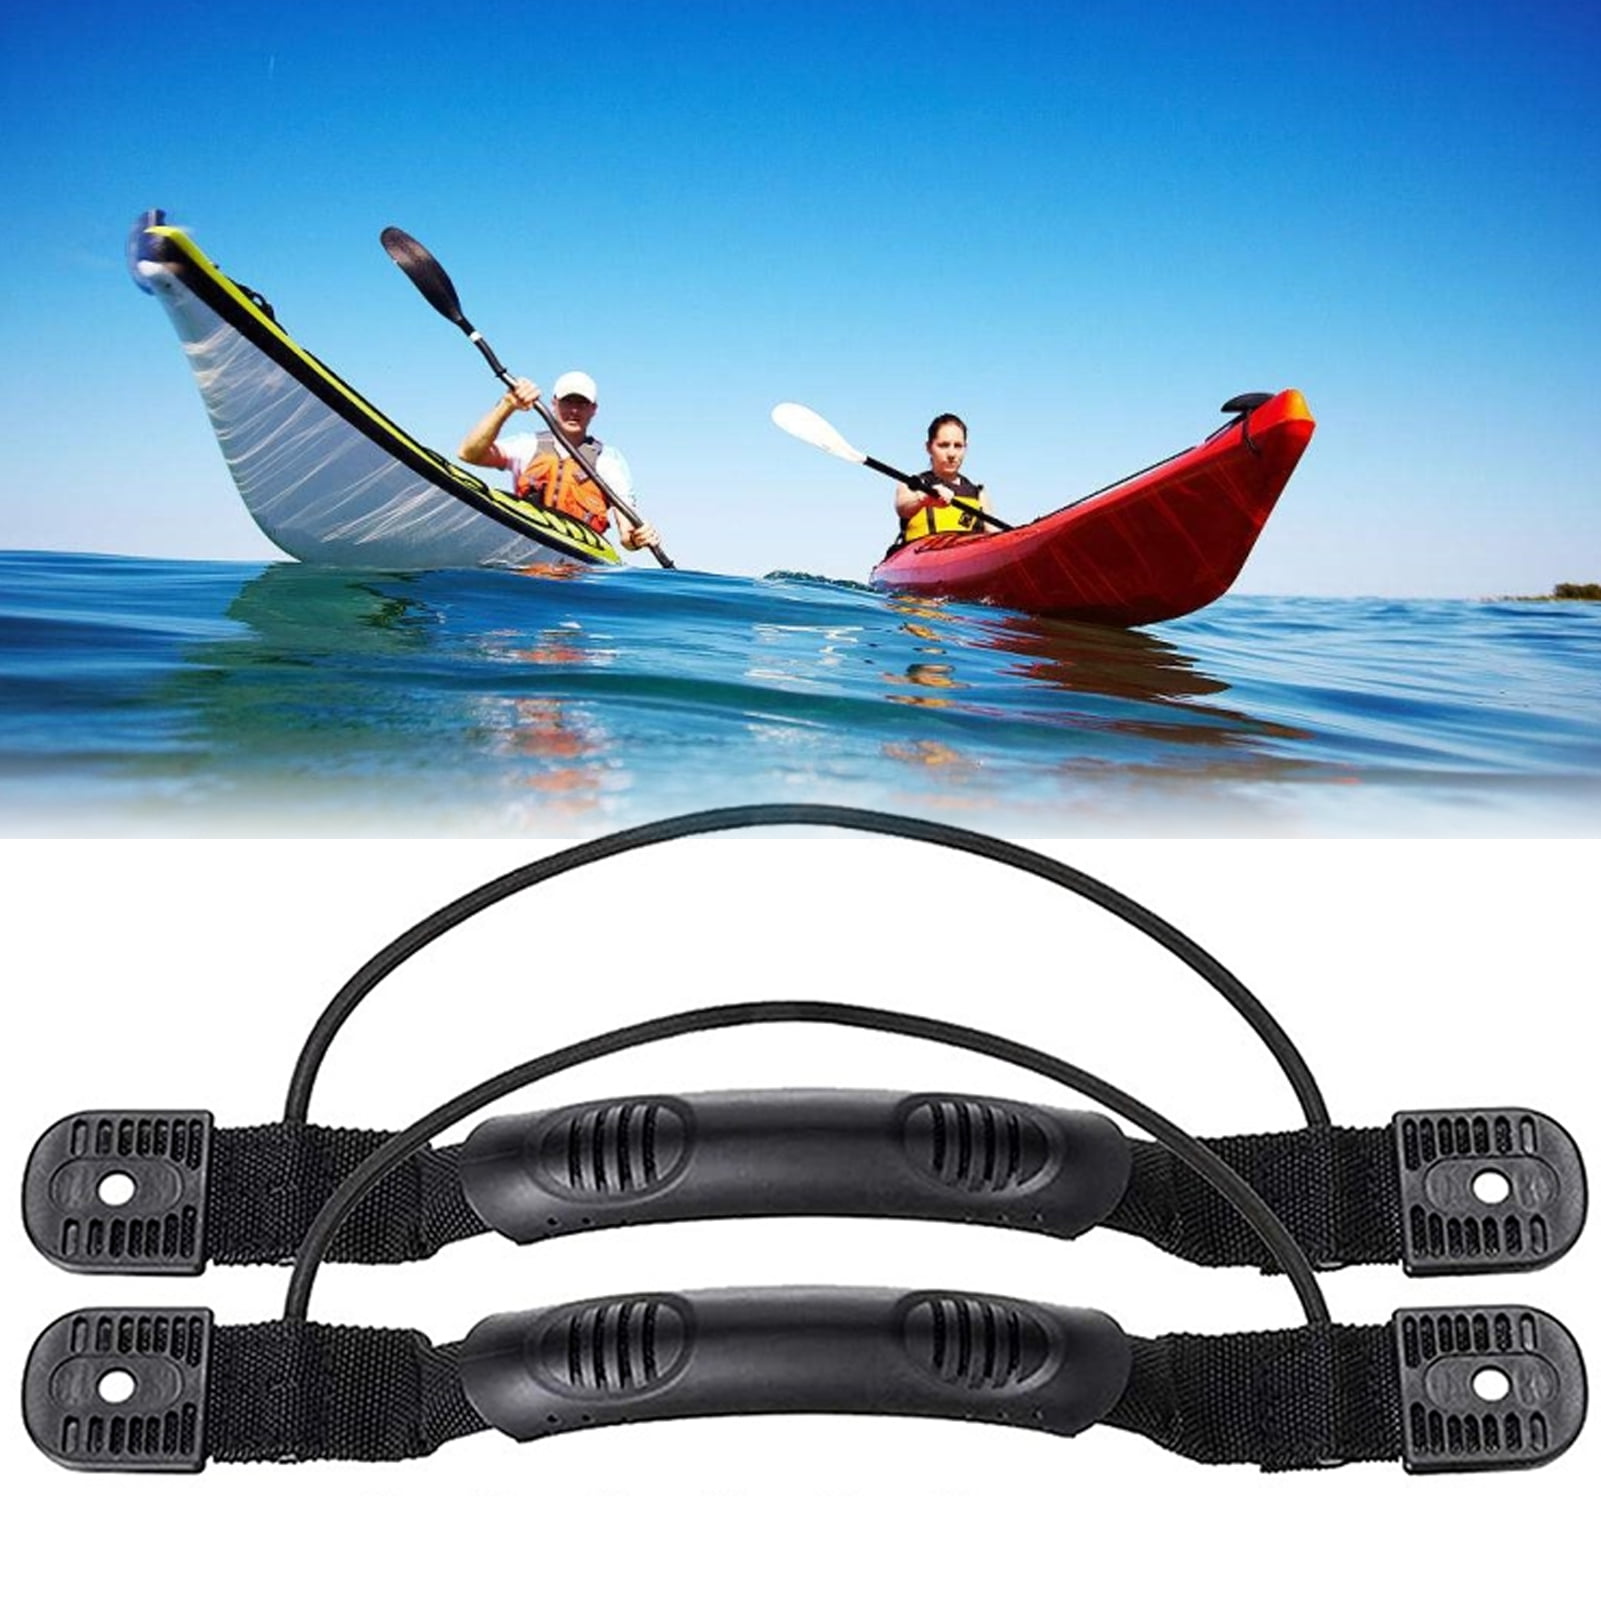 2x Kayak Canoe Boat Side Mount Carry Handle With Bungee Cord Screws Accessories 